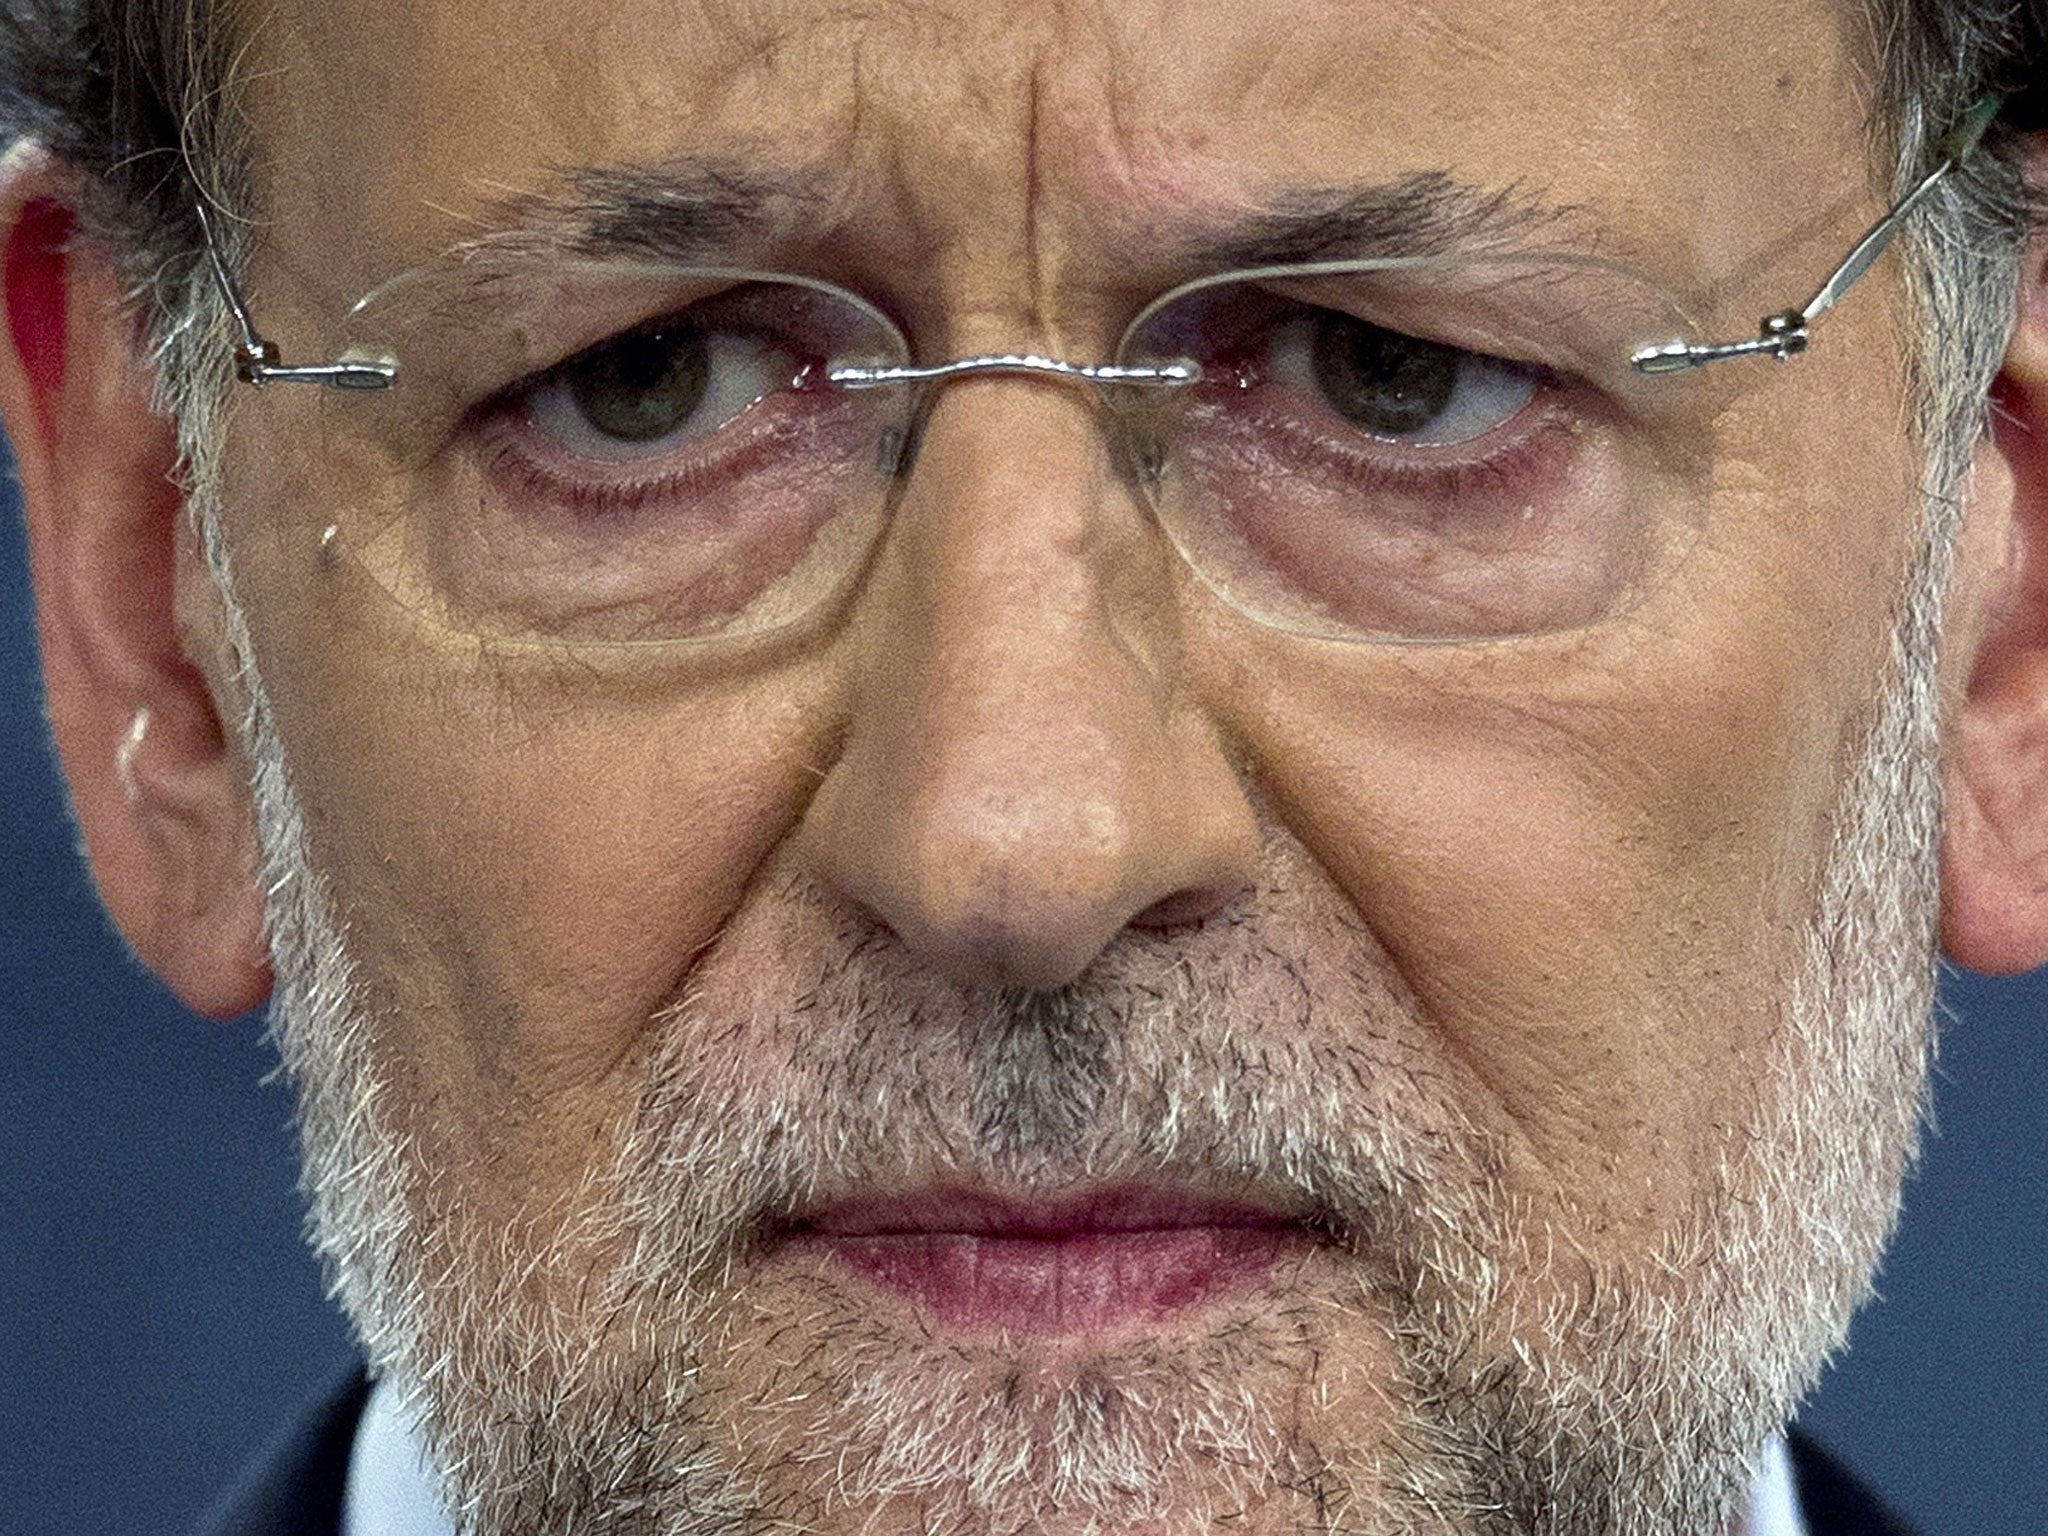 The newspaper report may further damage Prime Minister Mariano Rajoy's reputation